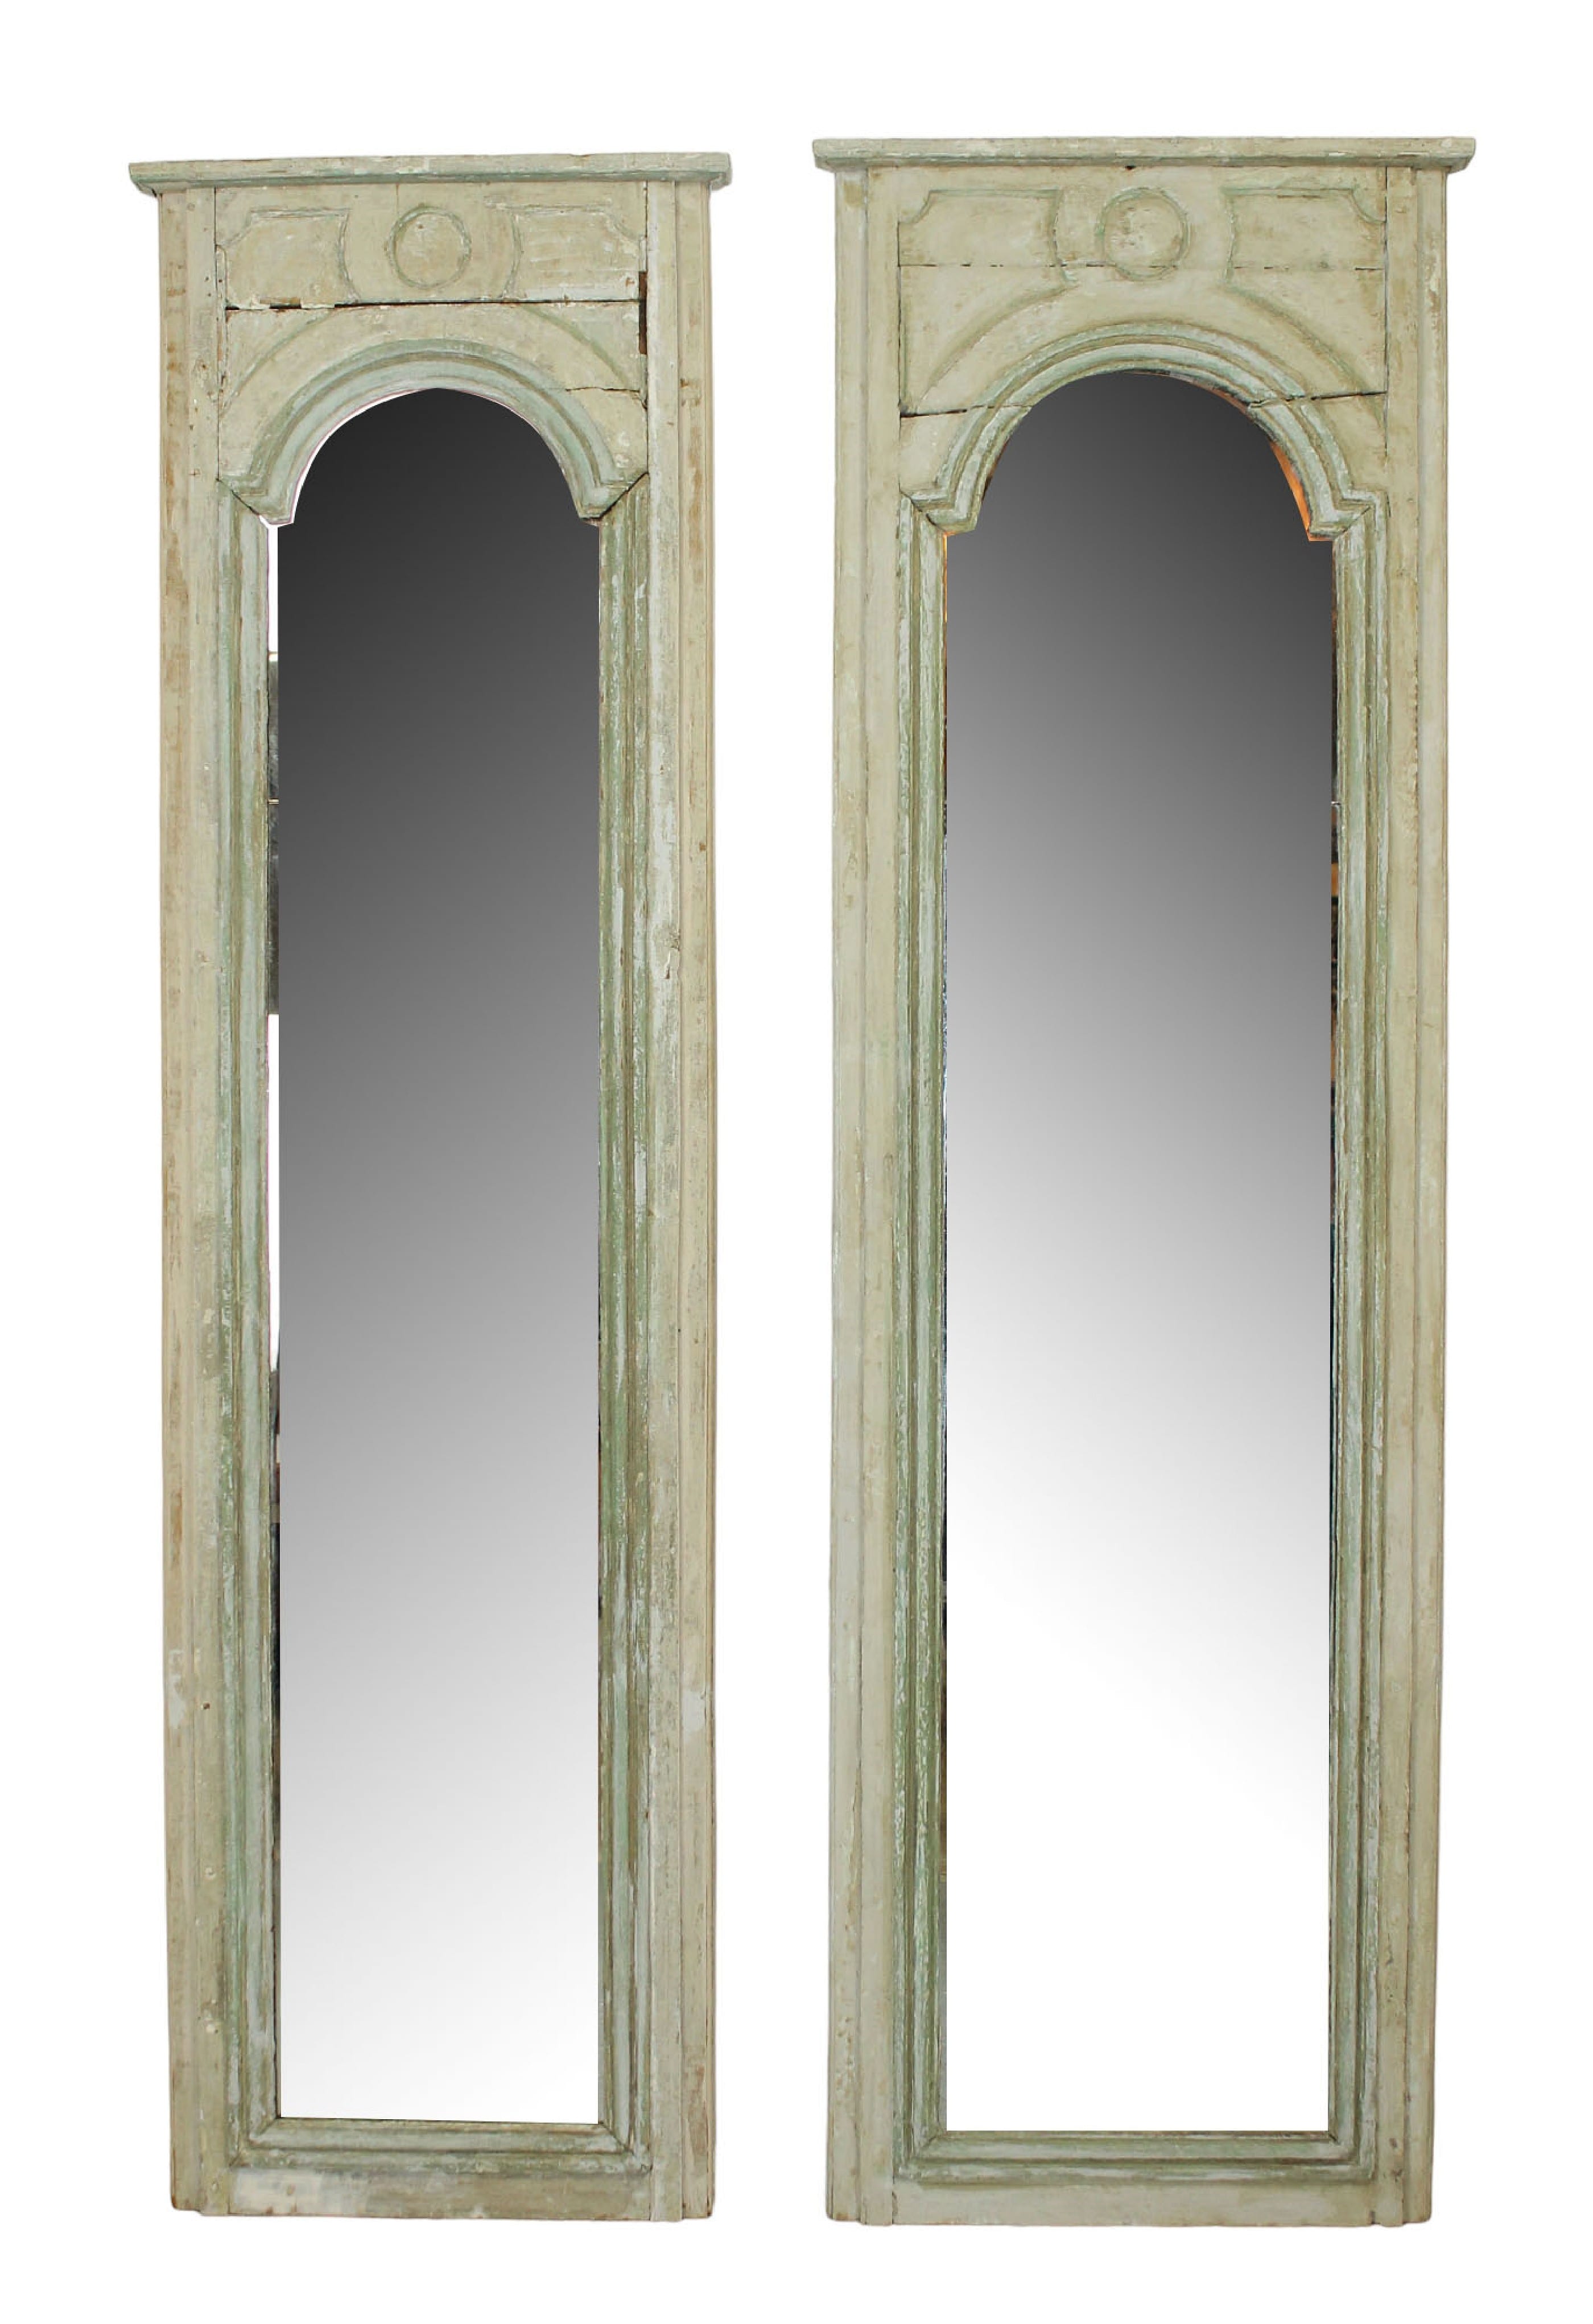 Pair of French Regency painted mirrors